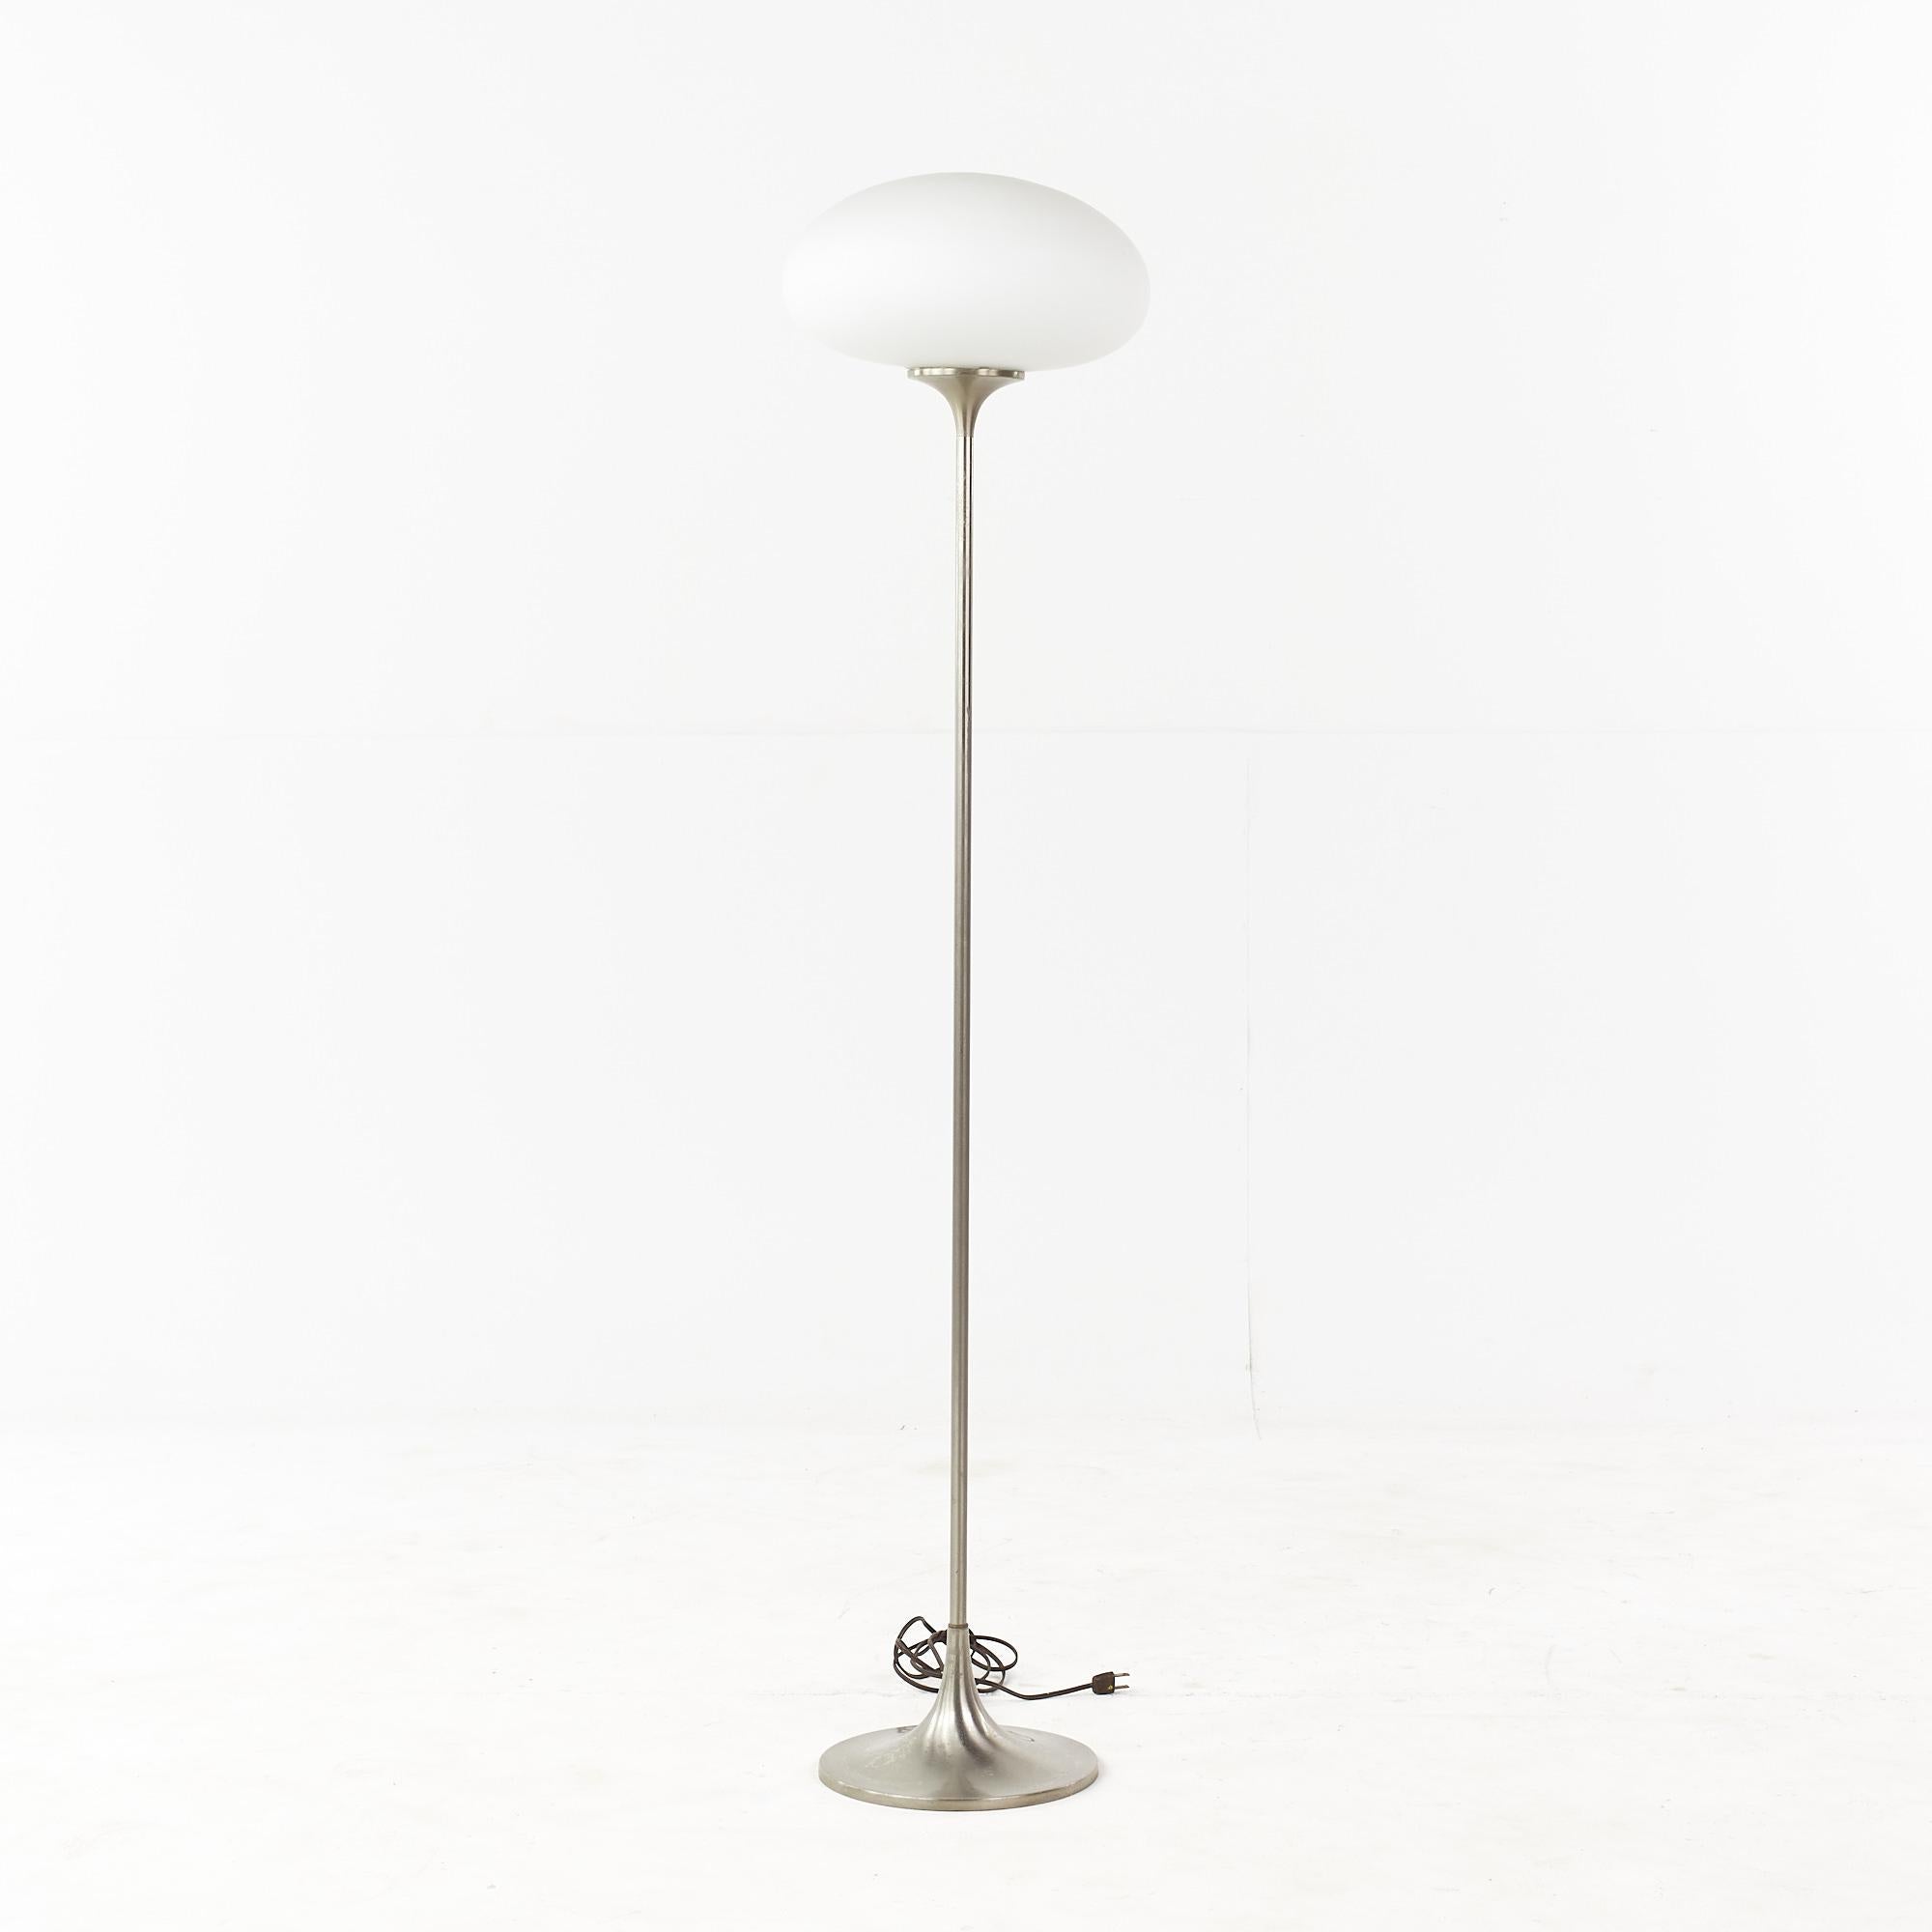 Laurel Lamp Company Mid Century Stainless Steel Tulip Floor Lamp - Pair In Good Condition For Sale In Countryside, IL